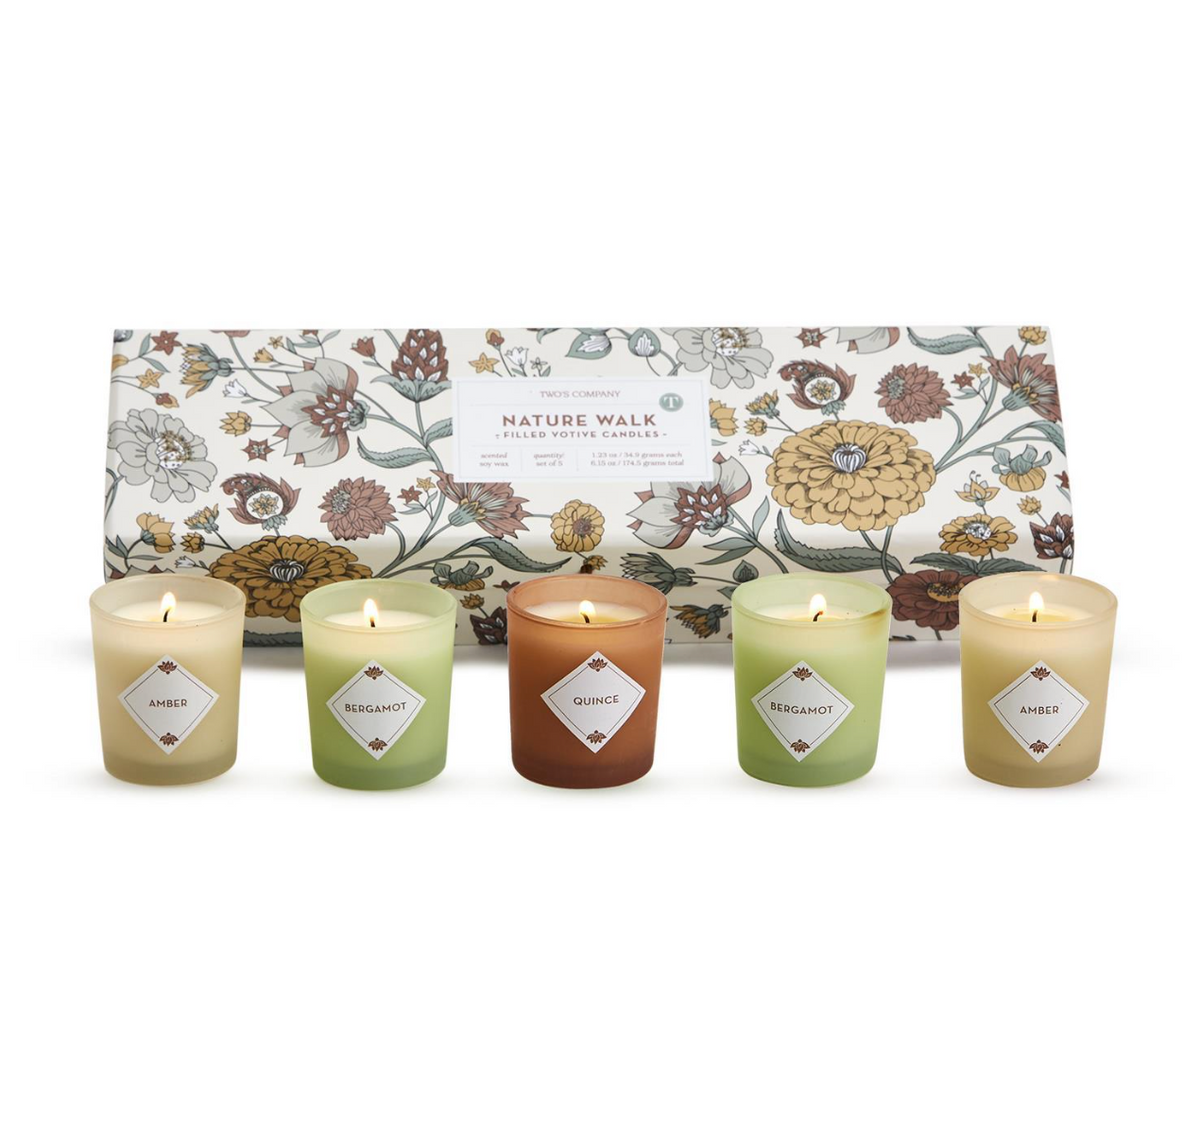 Two's Company Nature Walk S/5 Candles in Gift Box